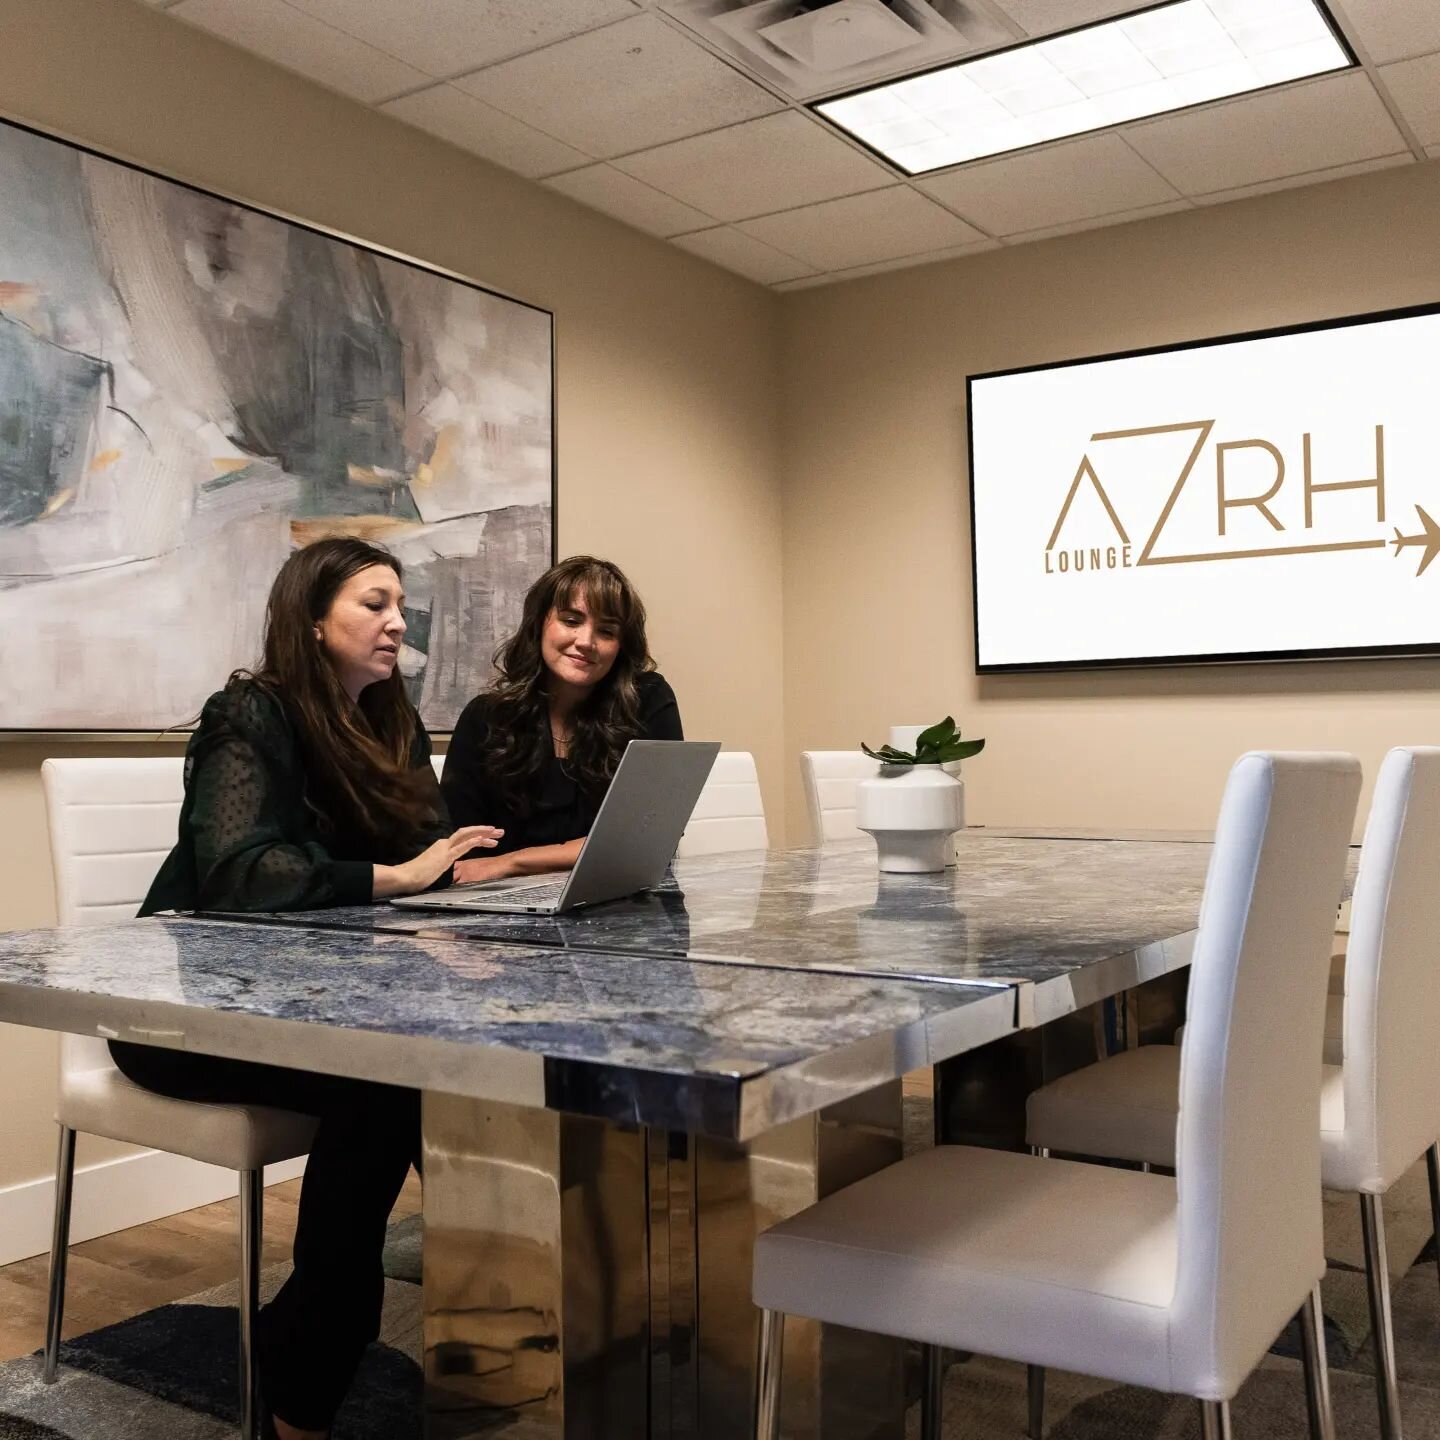 Have your meetings here!! 🤝 We offer a great, flexible space for small businesses. 

Call us now at 623-226-8182 or visit us at www.AZRHlounge.com

#scottsdalelounge #travellounge #scottsdalemeetingrooms #scottsdalemeetingroomrentals #meetingrooms #